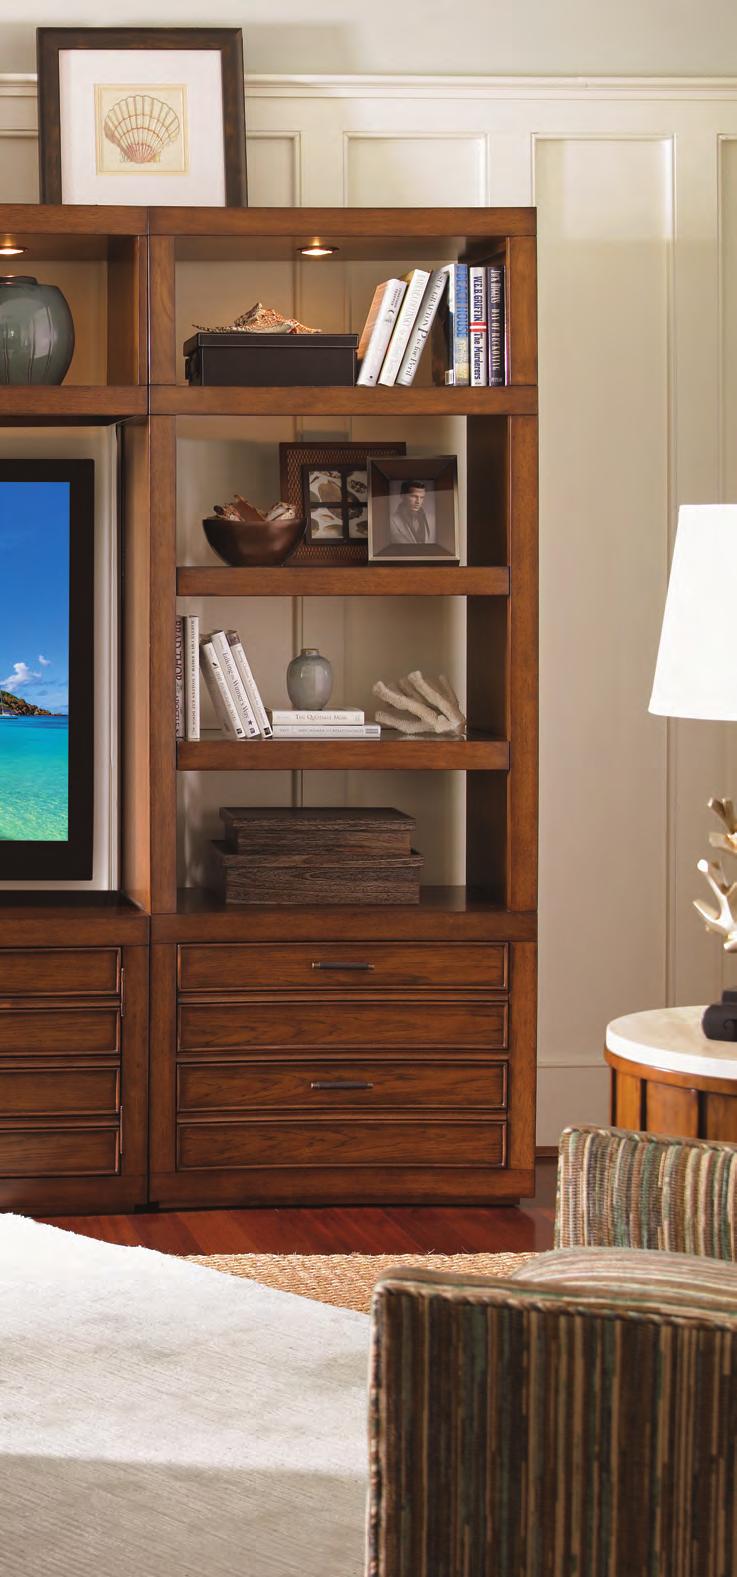 The 60 Plantation Bay console from the prior page is shown here in dramatic fashion as a full entertainment wall.